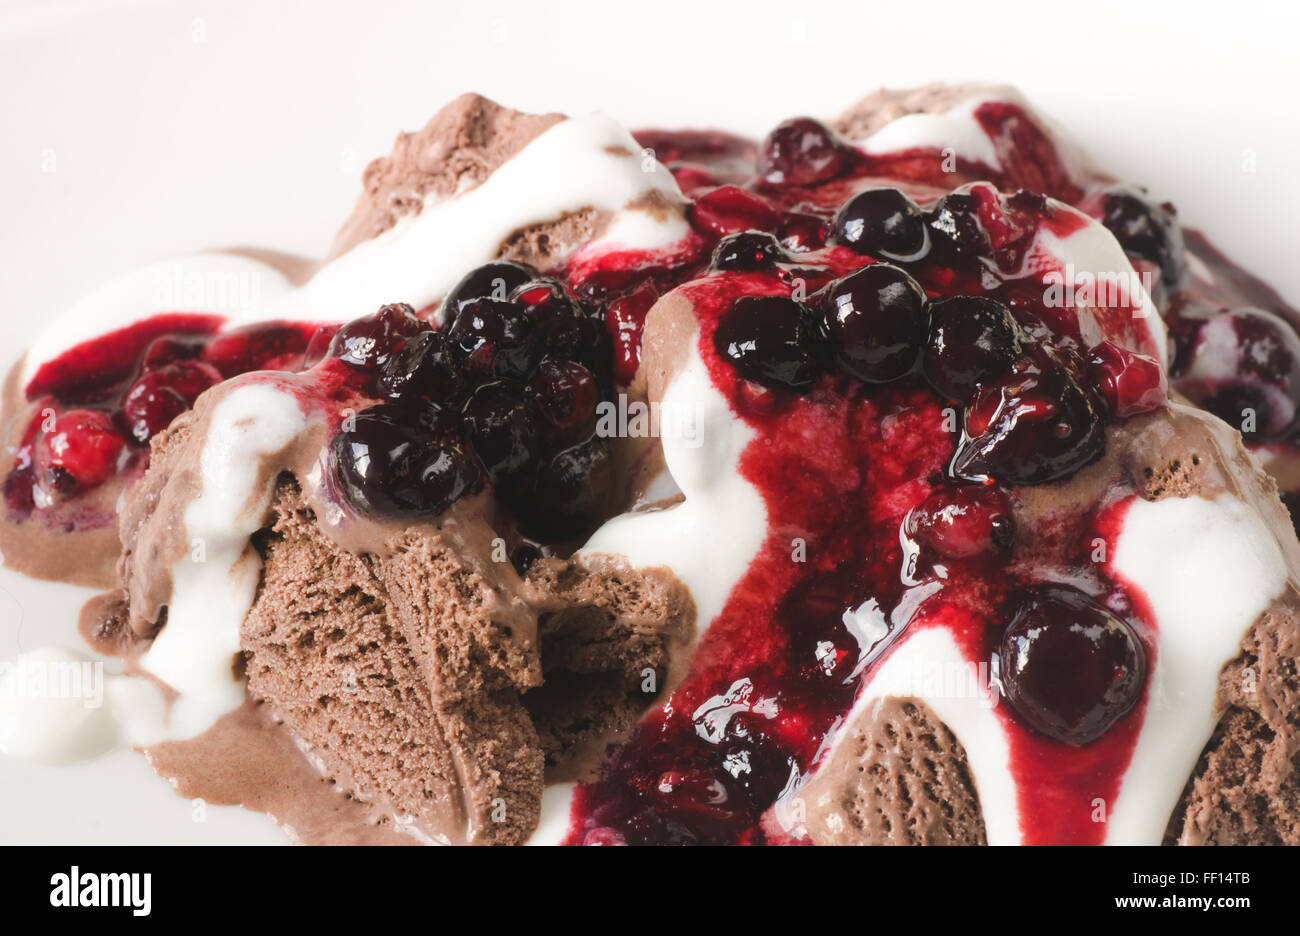 chocolate ice cream with whipped cream and fruits sauce Stock Photo